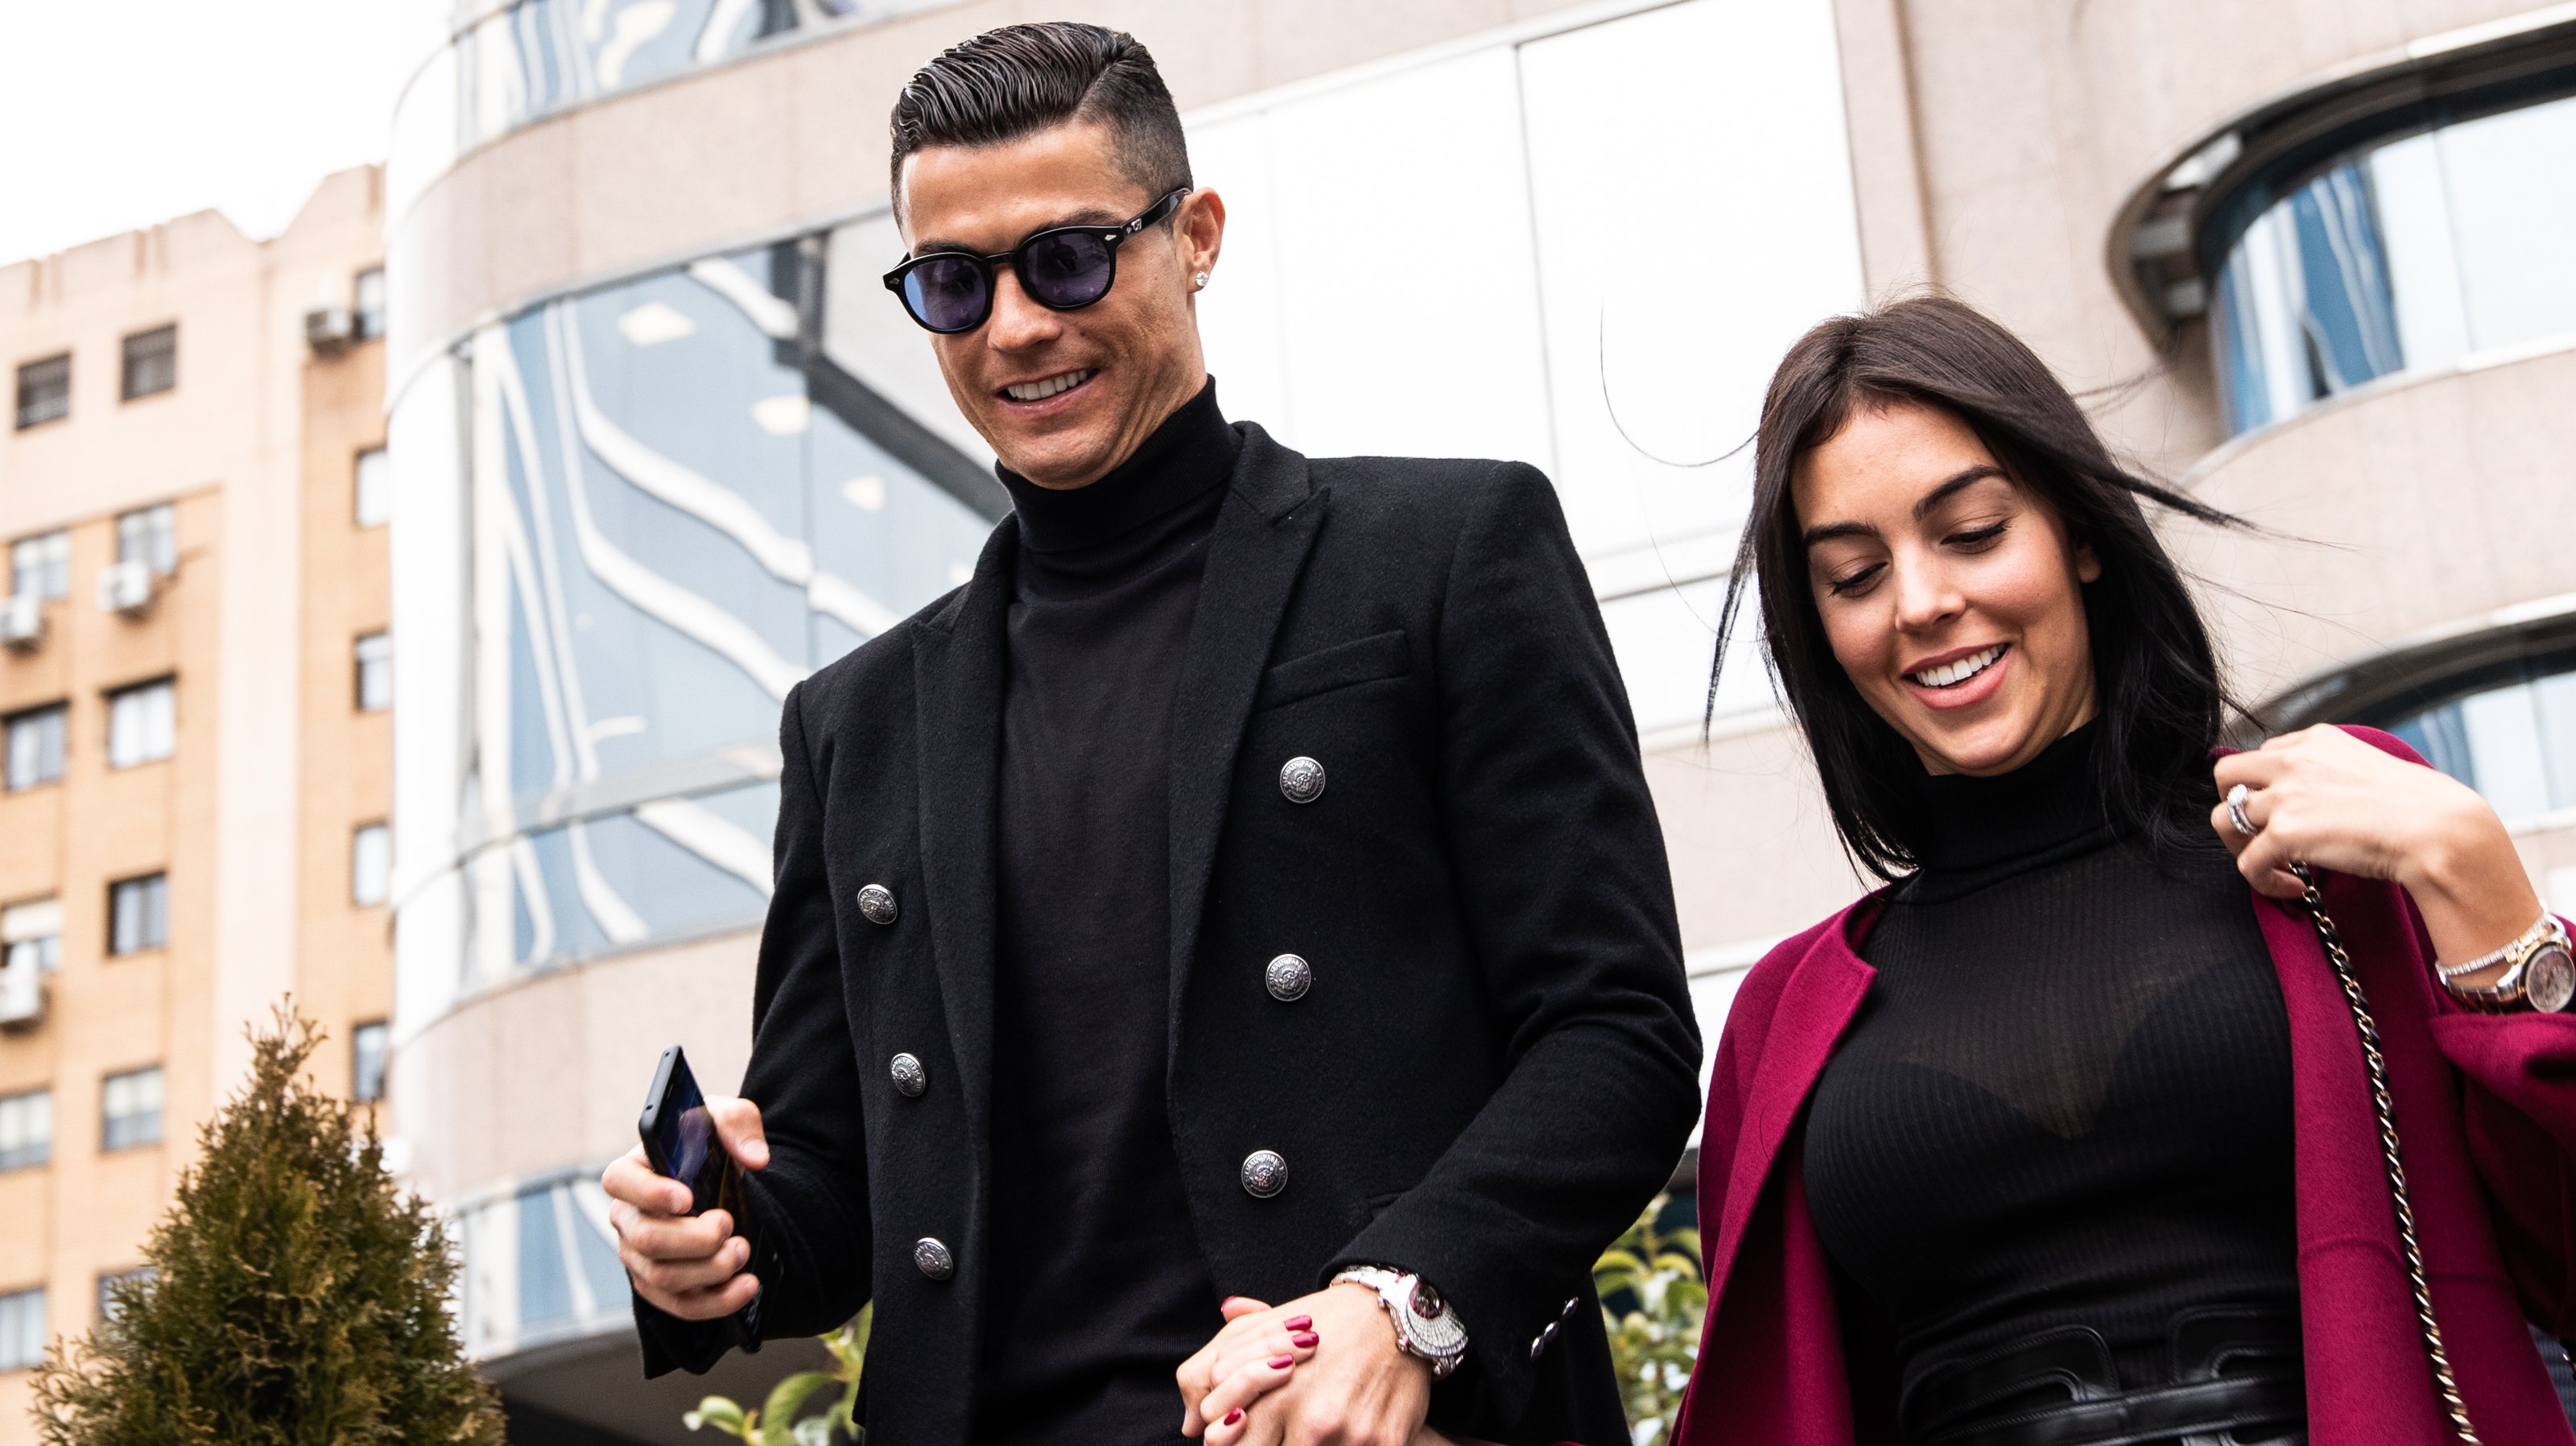 Portuguese soccer player Cristiano Ronaldo leaves from the